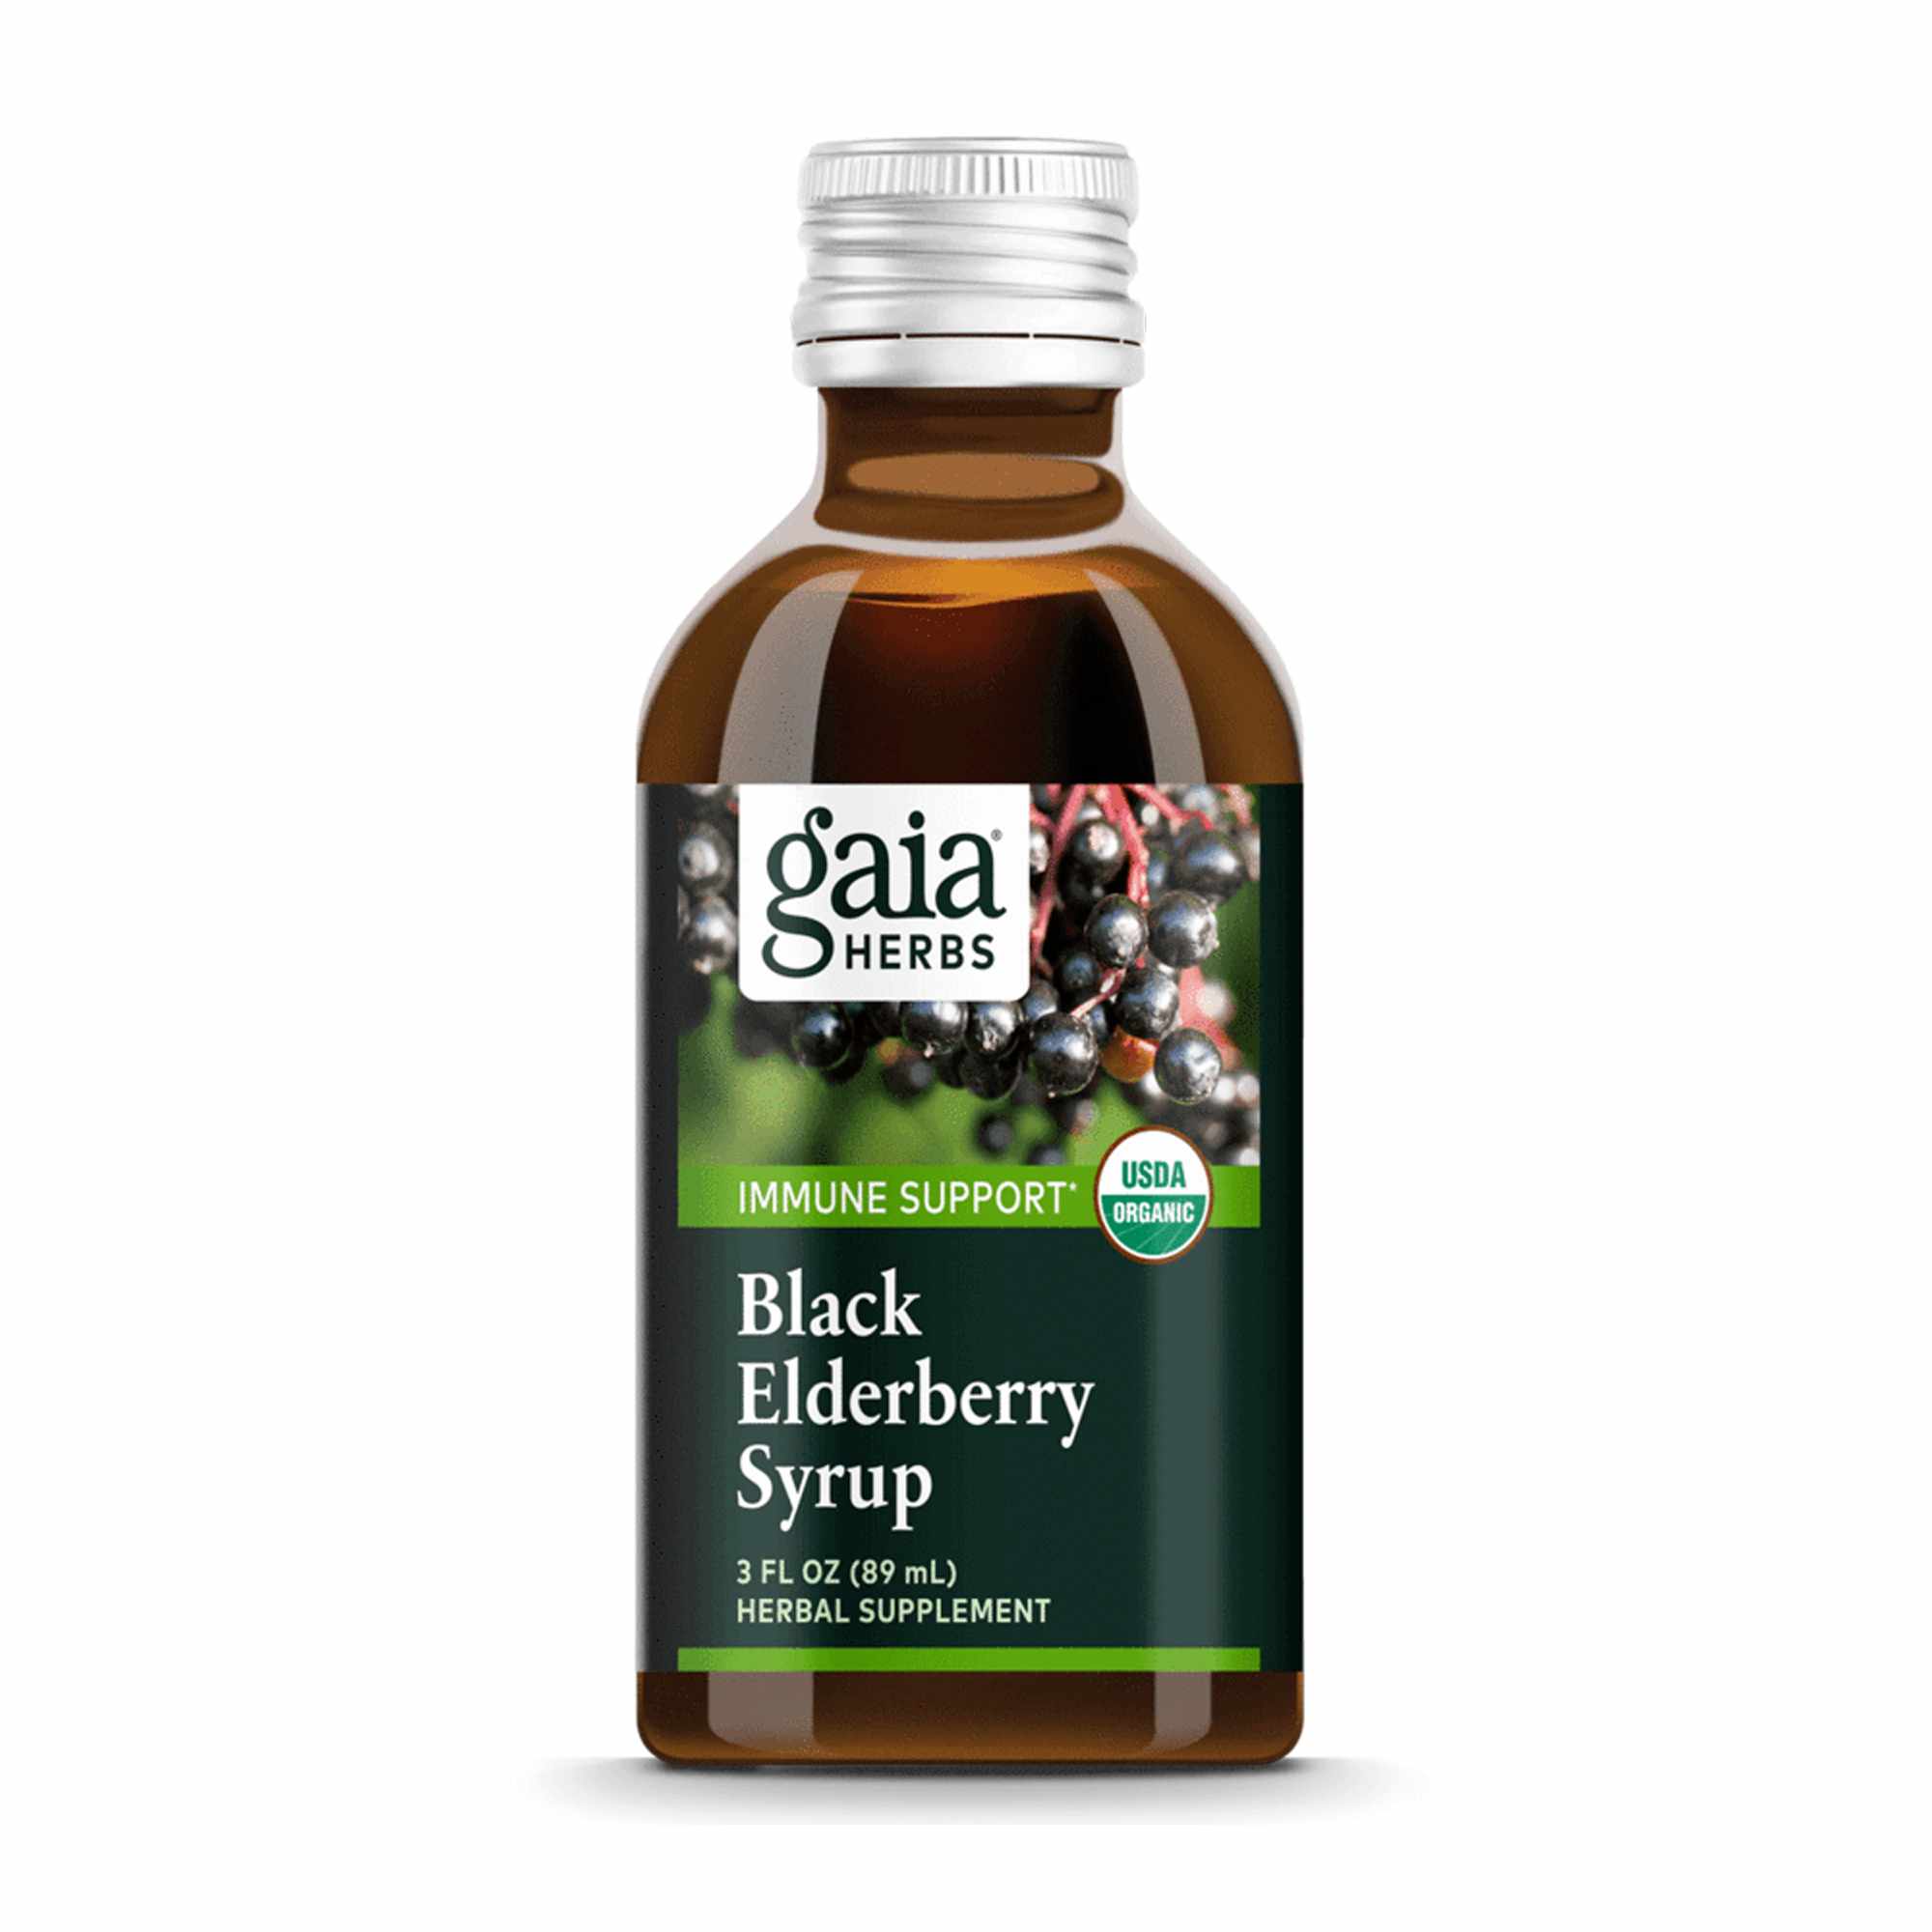 BLACK ELDERBERRY SYRUP Immune Support for children & adults